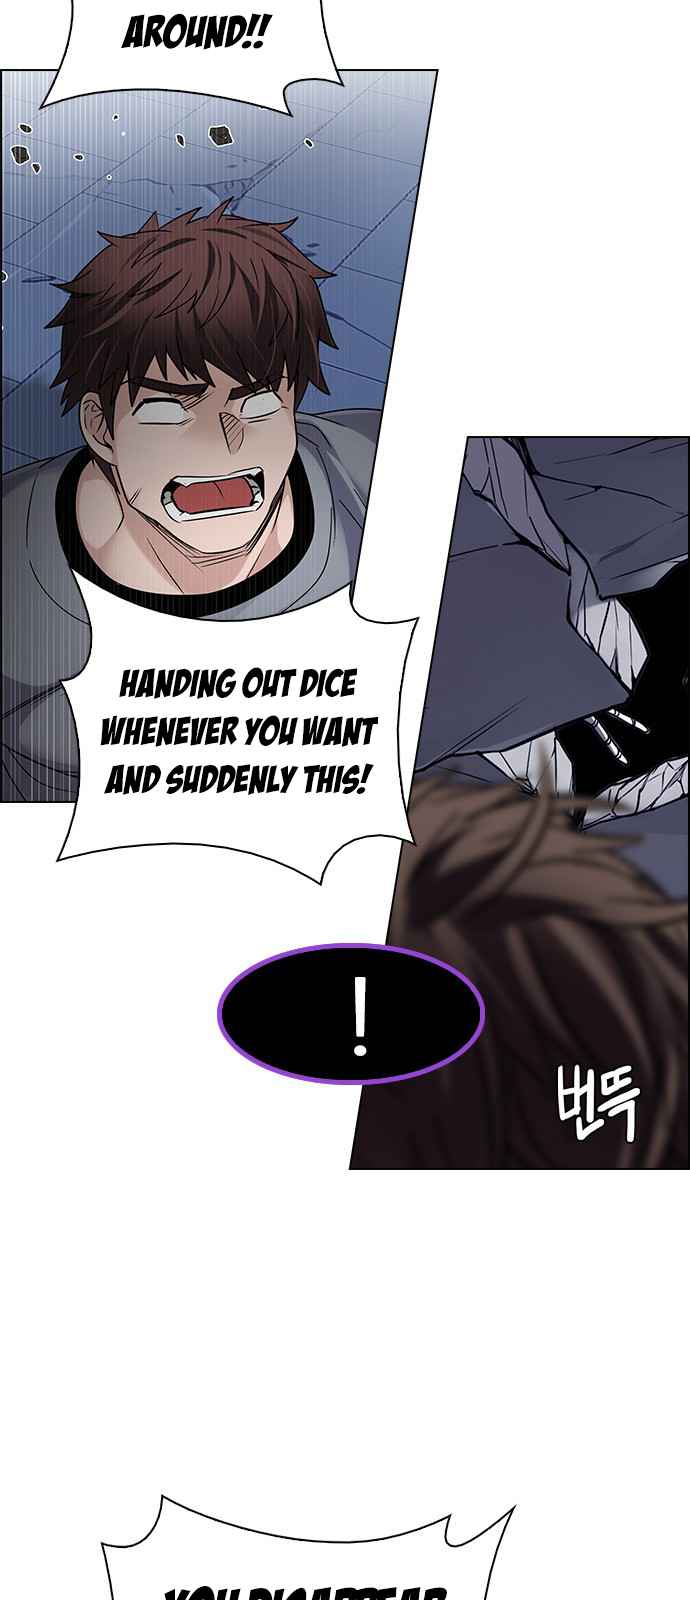 DICE: The Cube that Changes Everything Ch. 257 YOYO (3)